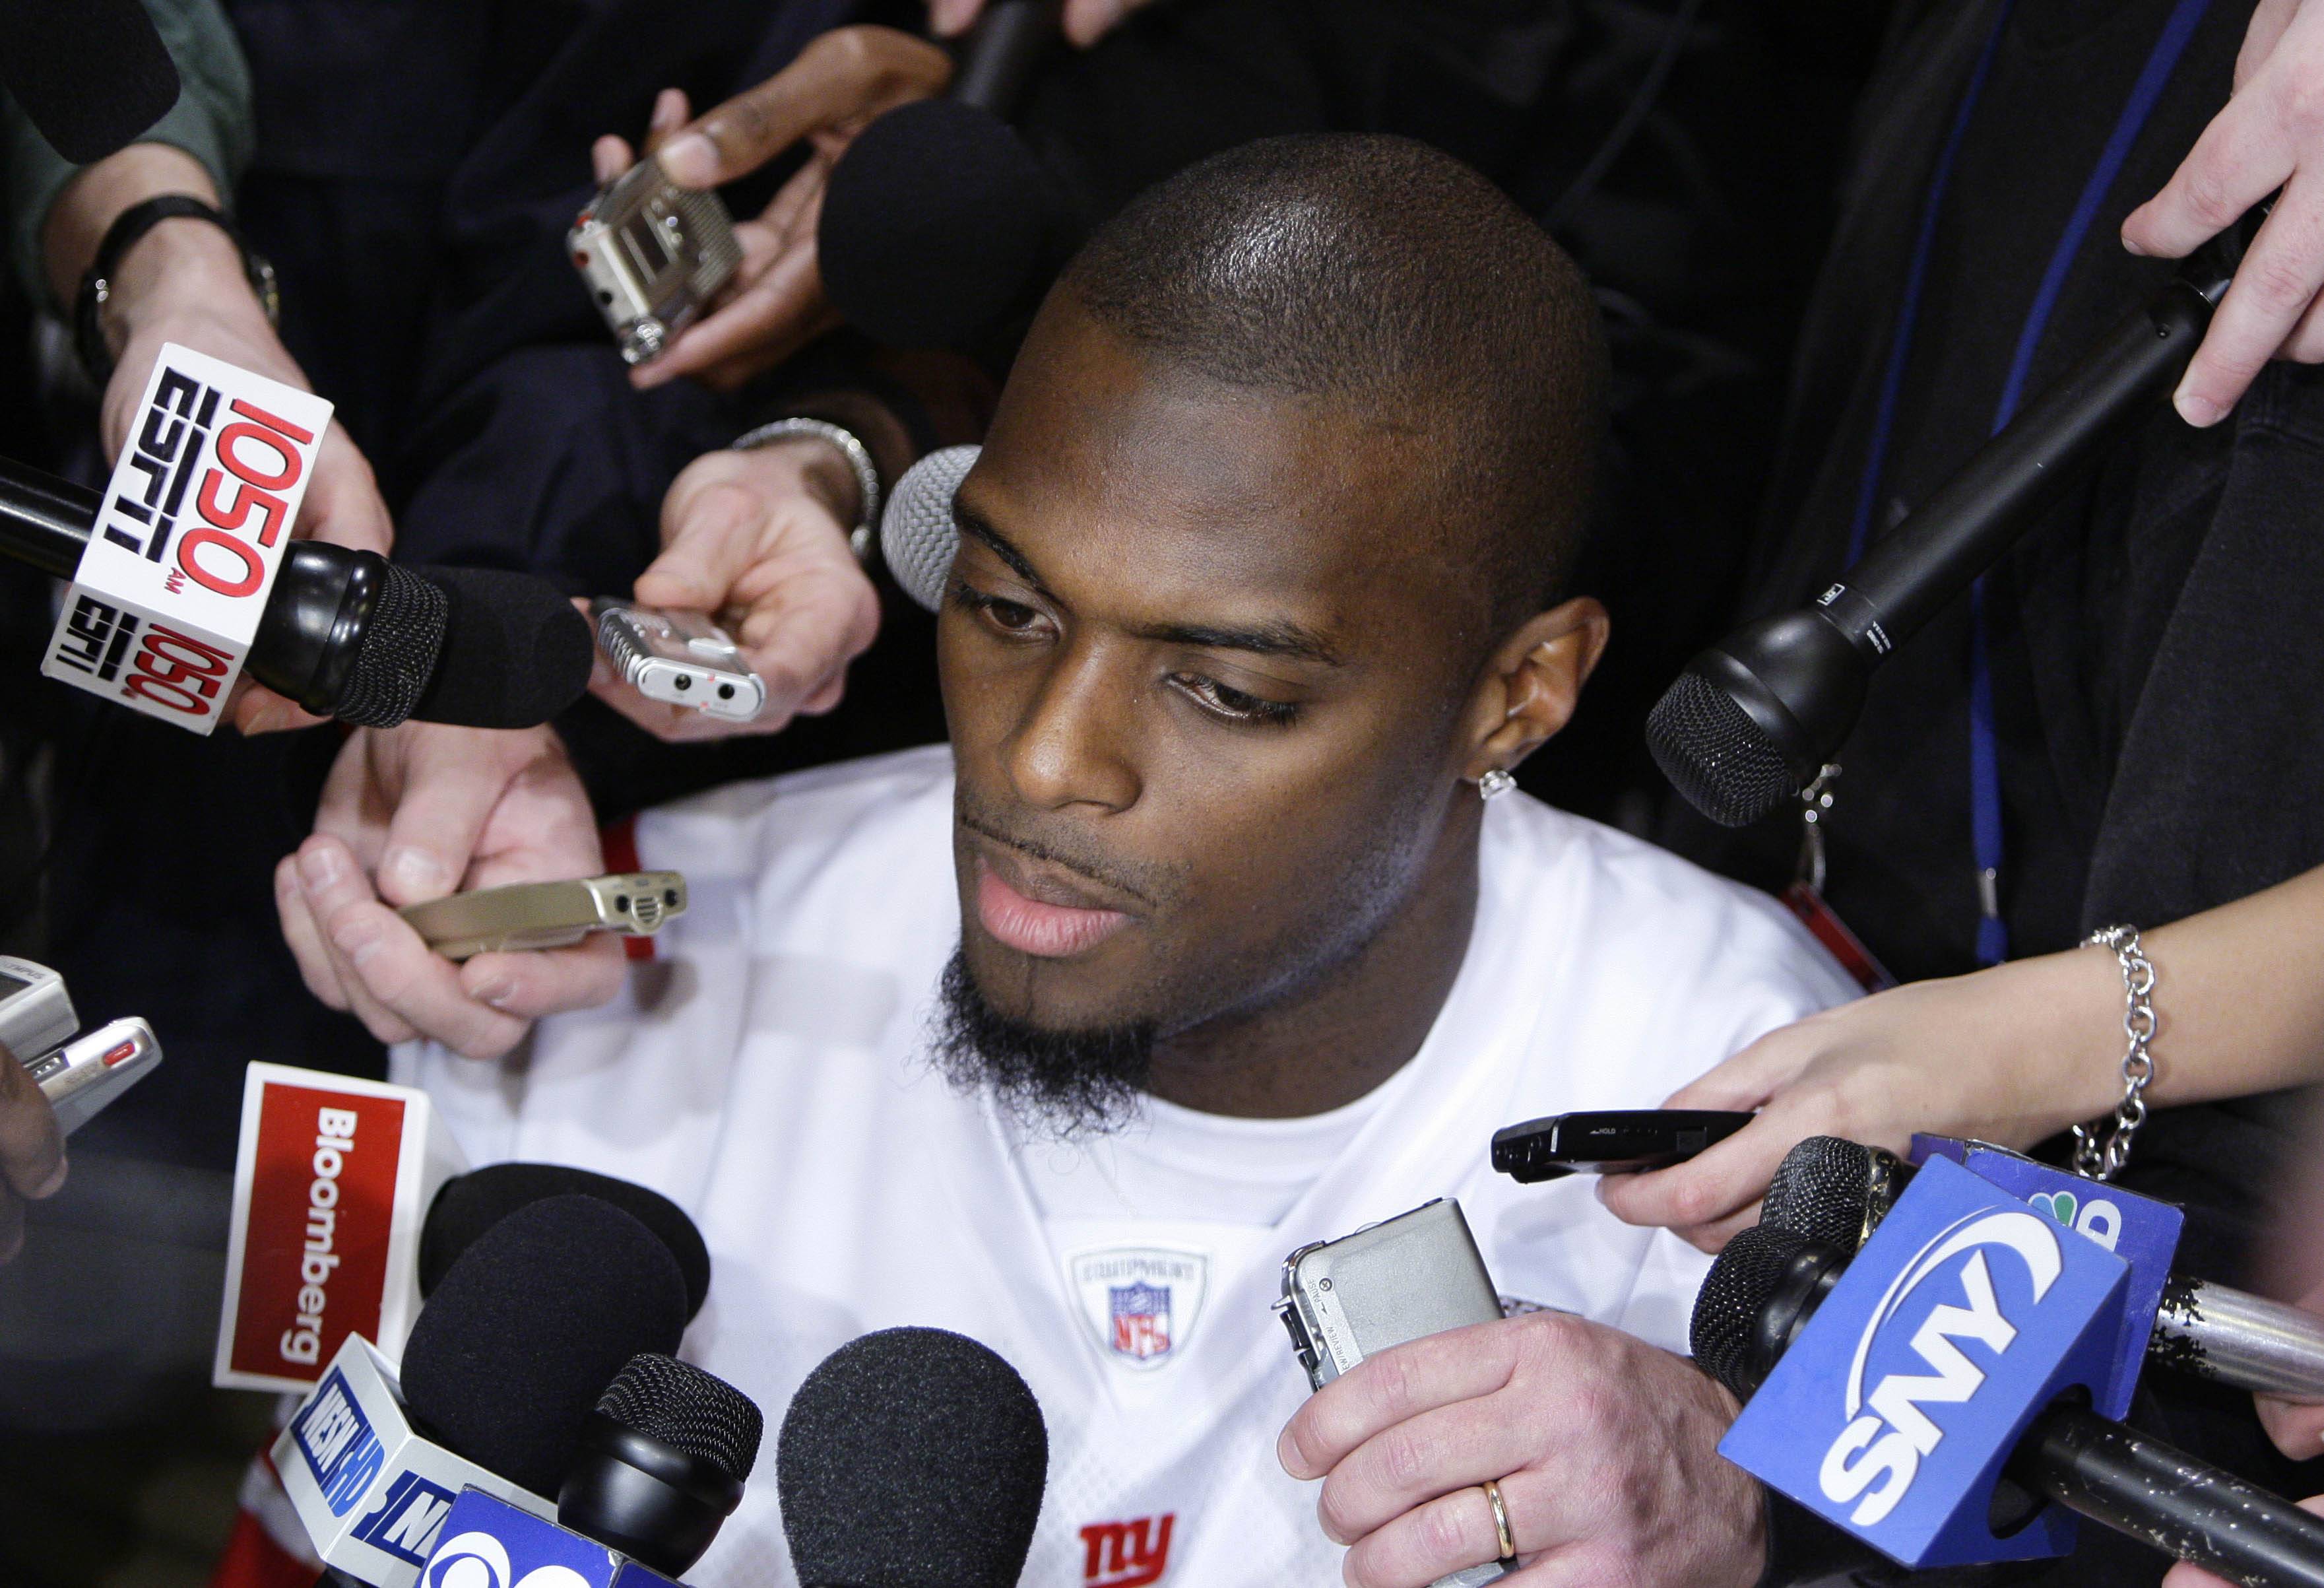 Plaxico Burress Back in the NFL - Plaxico Burress, the former New York Giants receiver who was recently released from prison after serving 20 months on a gun charge, reached a one-year, $3 million agreement with the New York Jets, the team said Sunday.(Photo: AP Photo/Julie Jacobson, File)